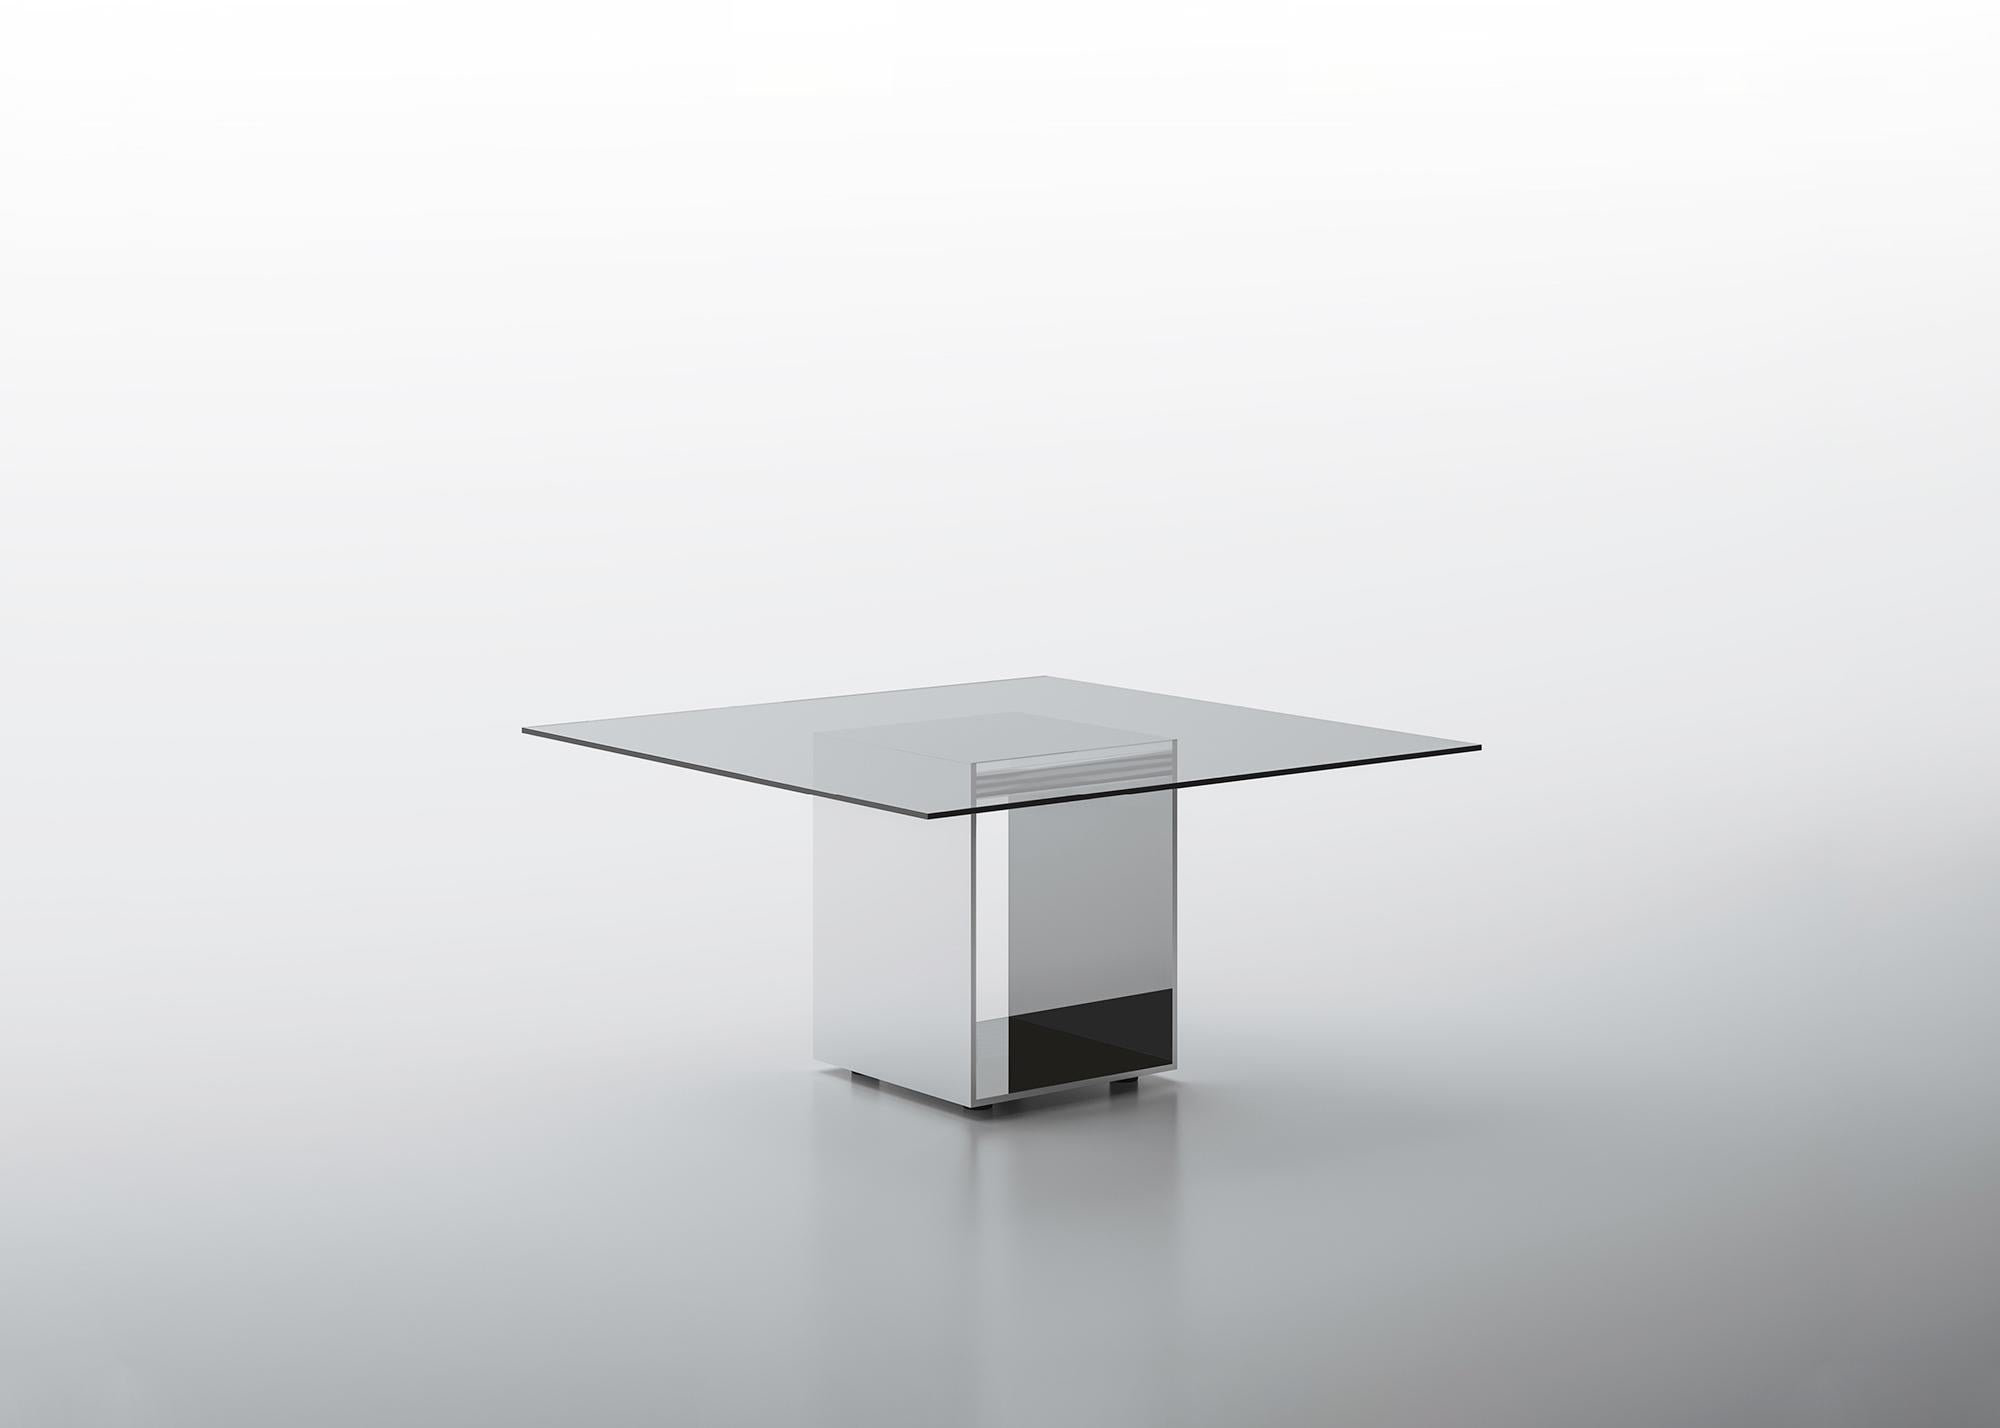 Judd is a system of tables that combines an essential line with rich materials. An innovative structural panel forms the base of the table. The exterior is in bright polished stainless steel, the interior is finished with mirror, lead mirror or